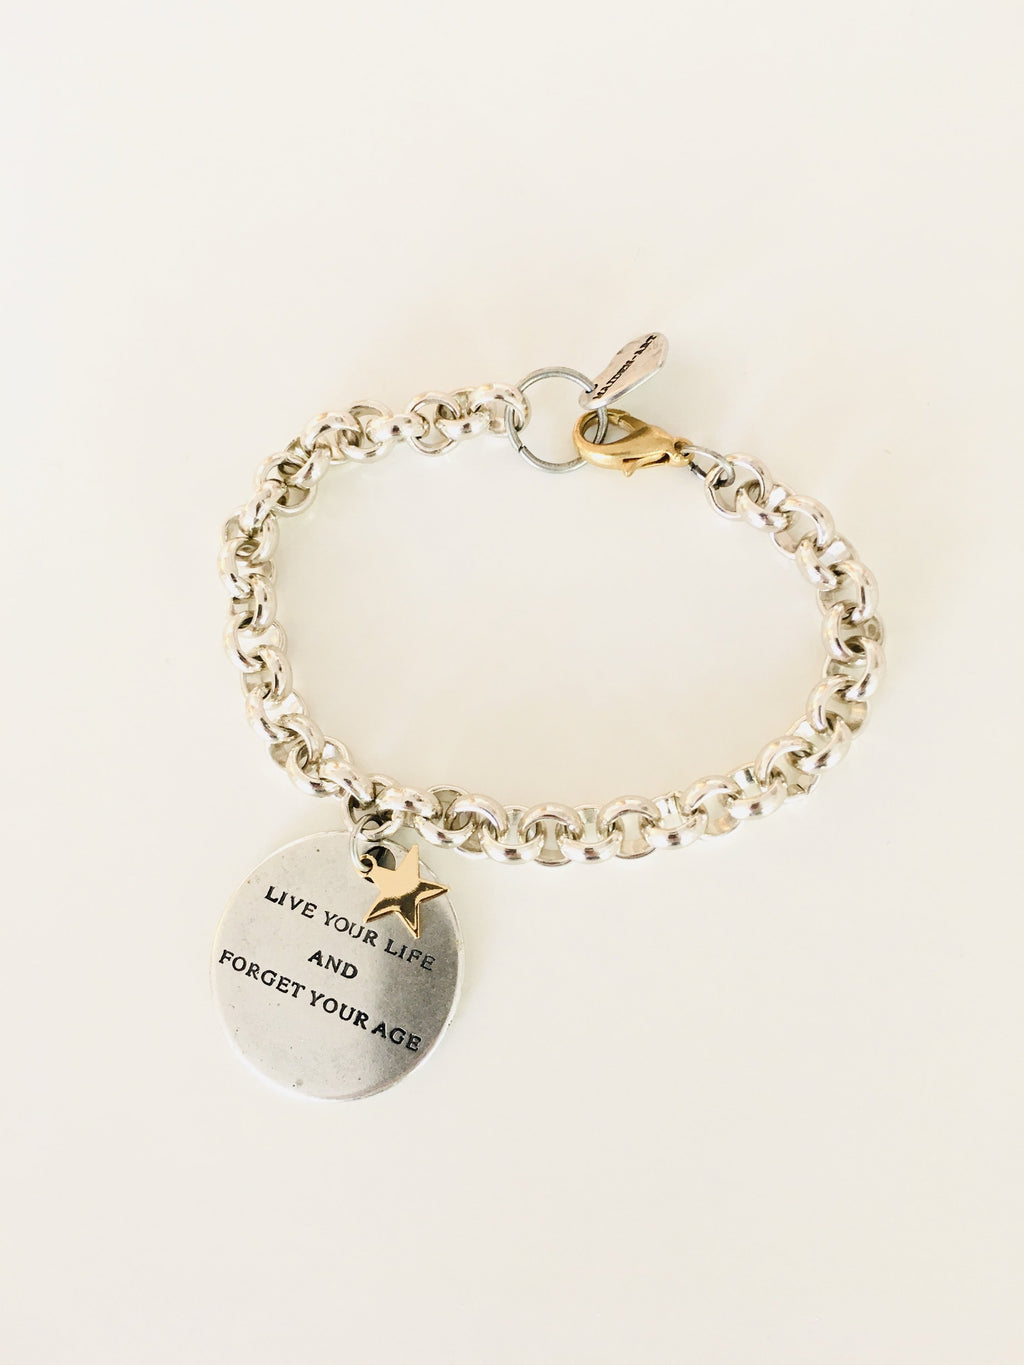 Message Bracelet in Silver and Gold Star Charm.